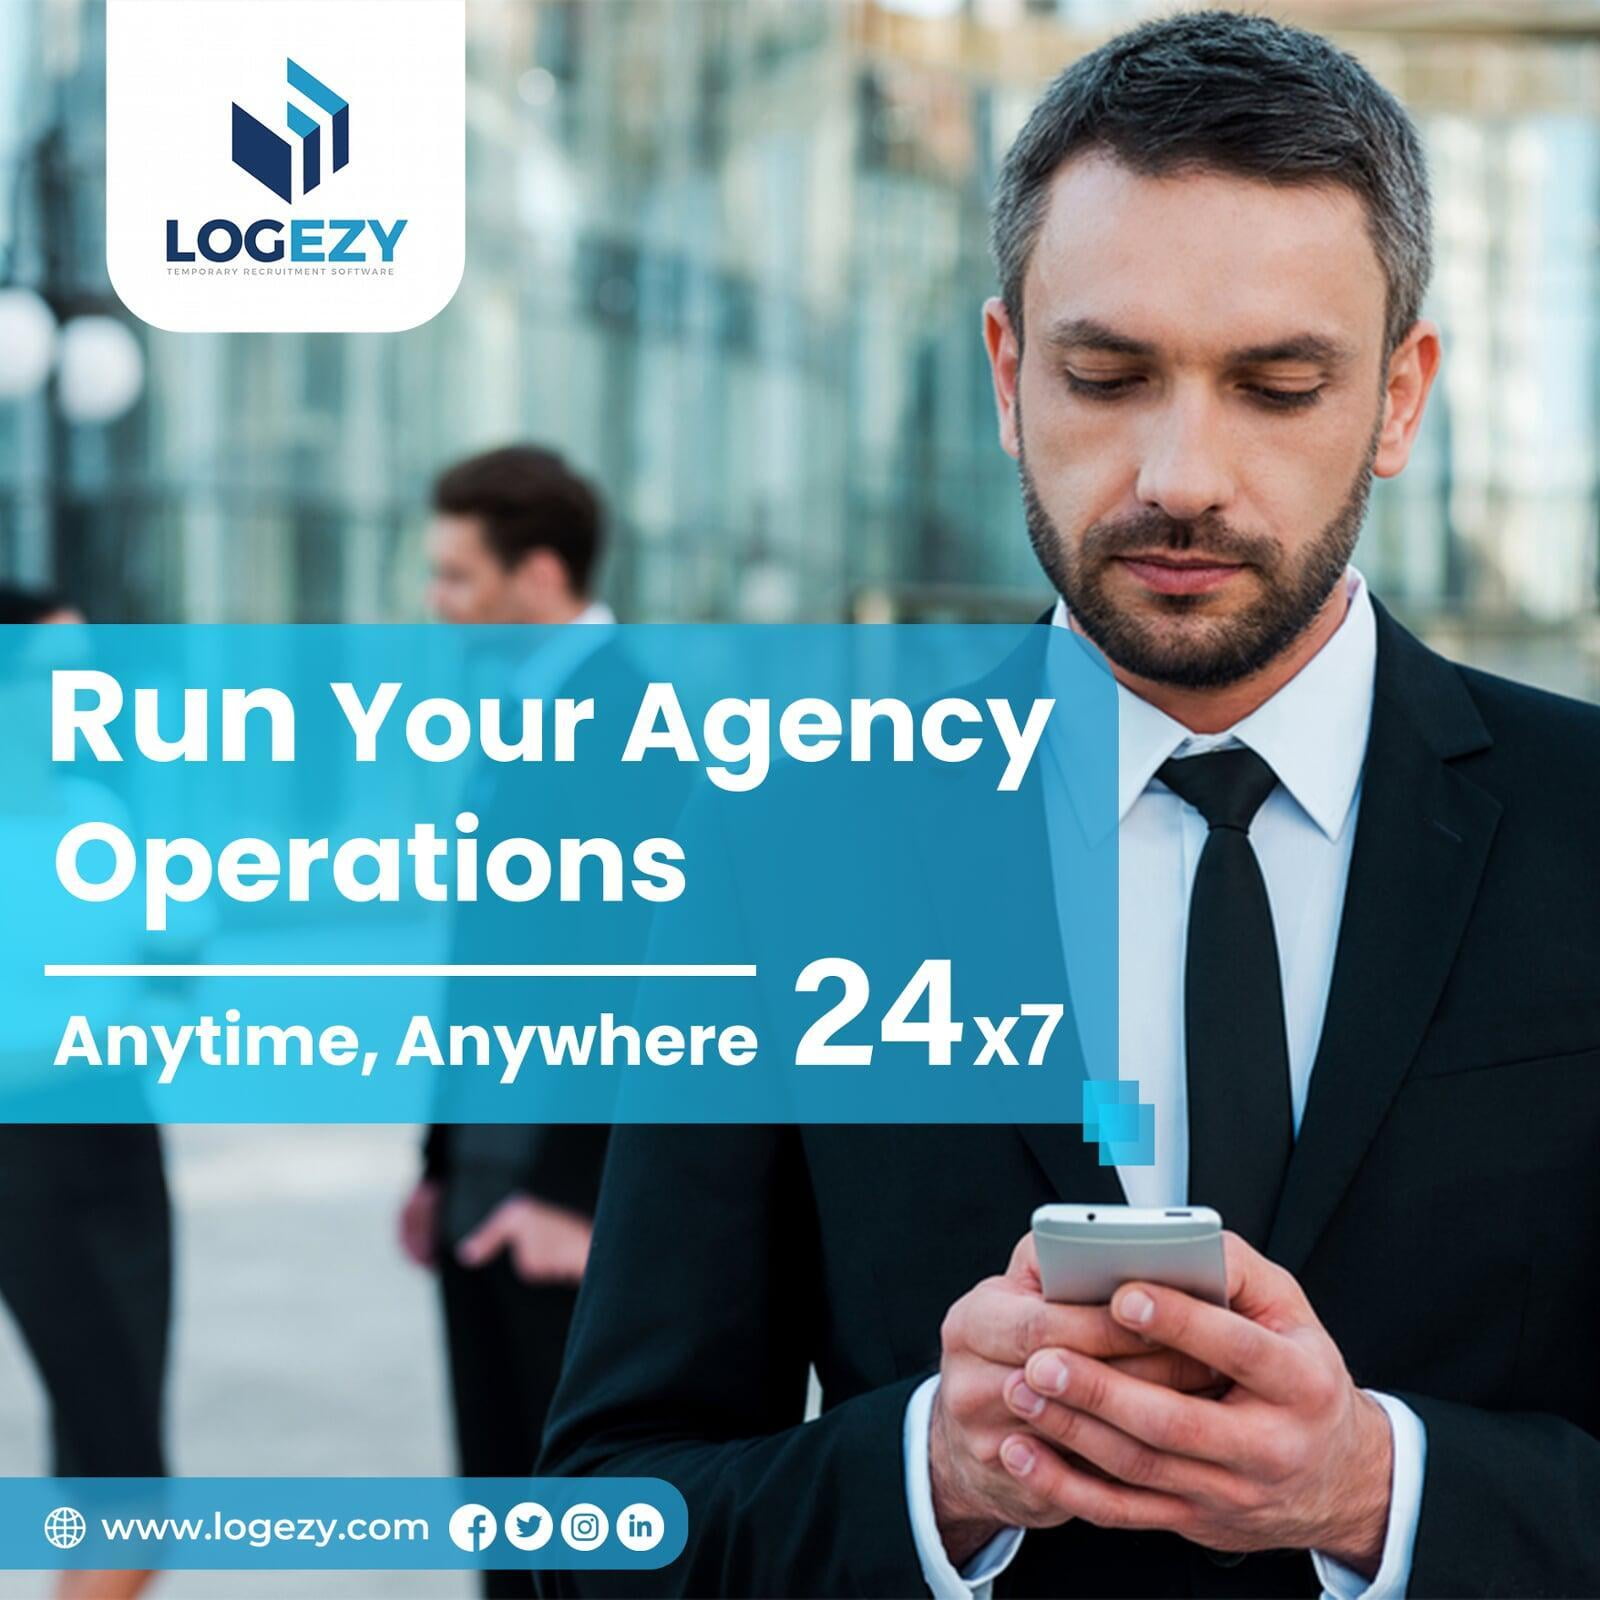 Run Your Nursing Agency Operations From Your Mobile